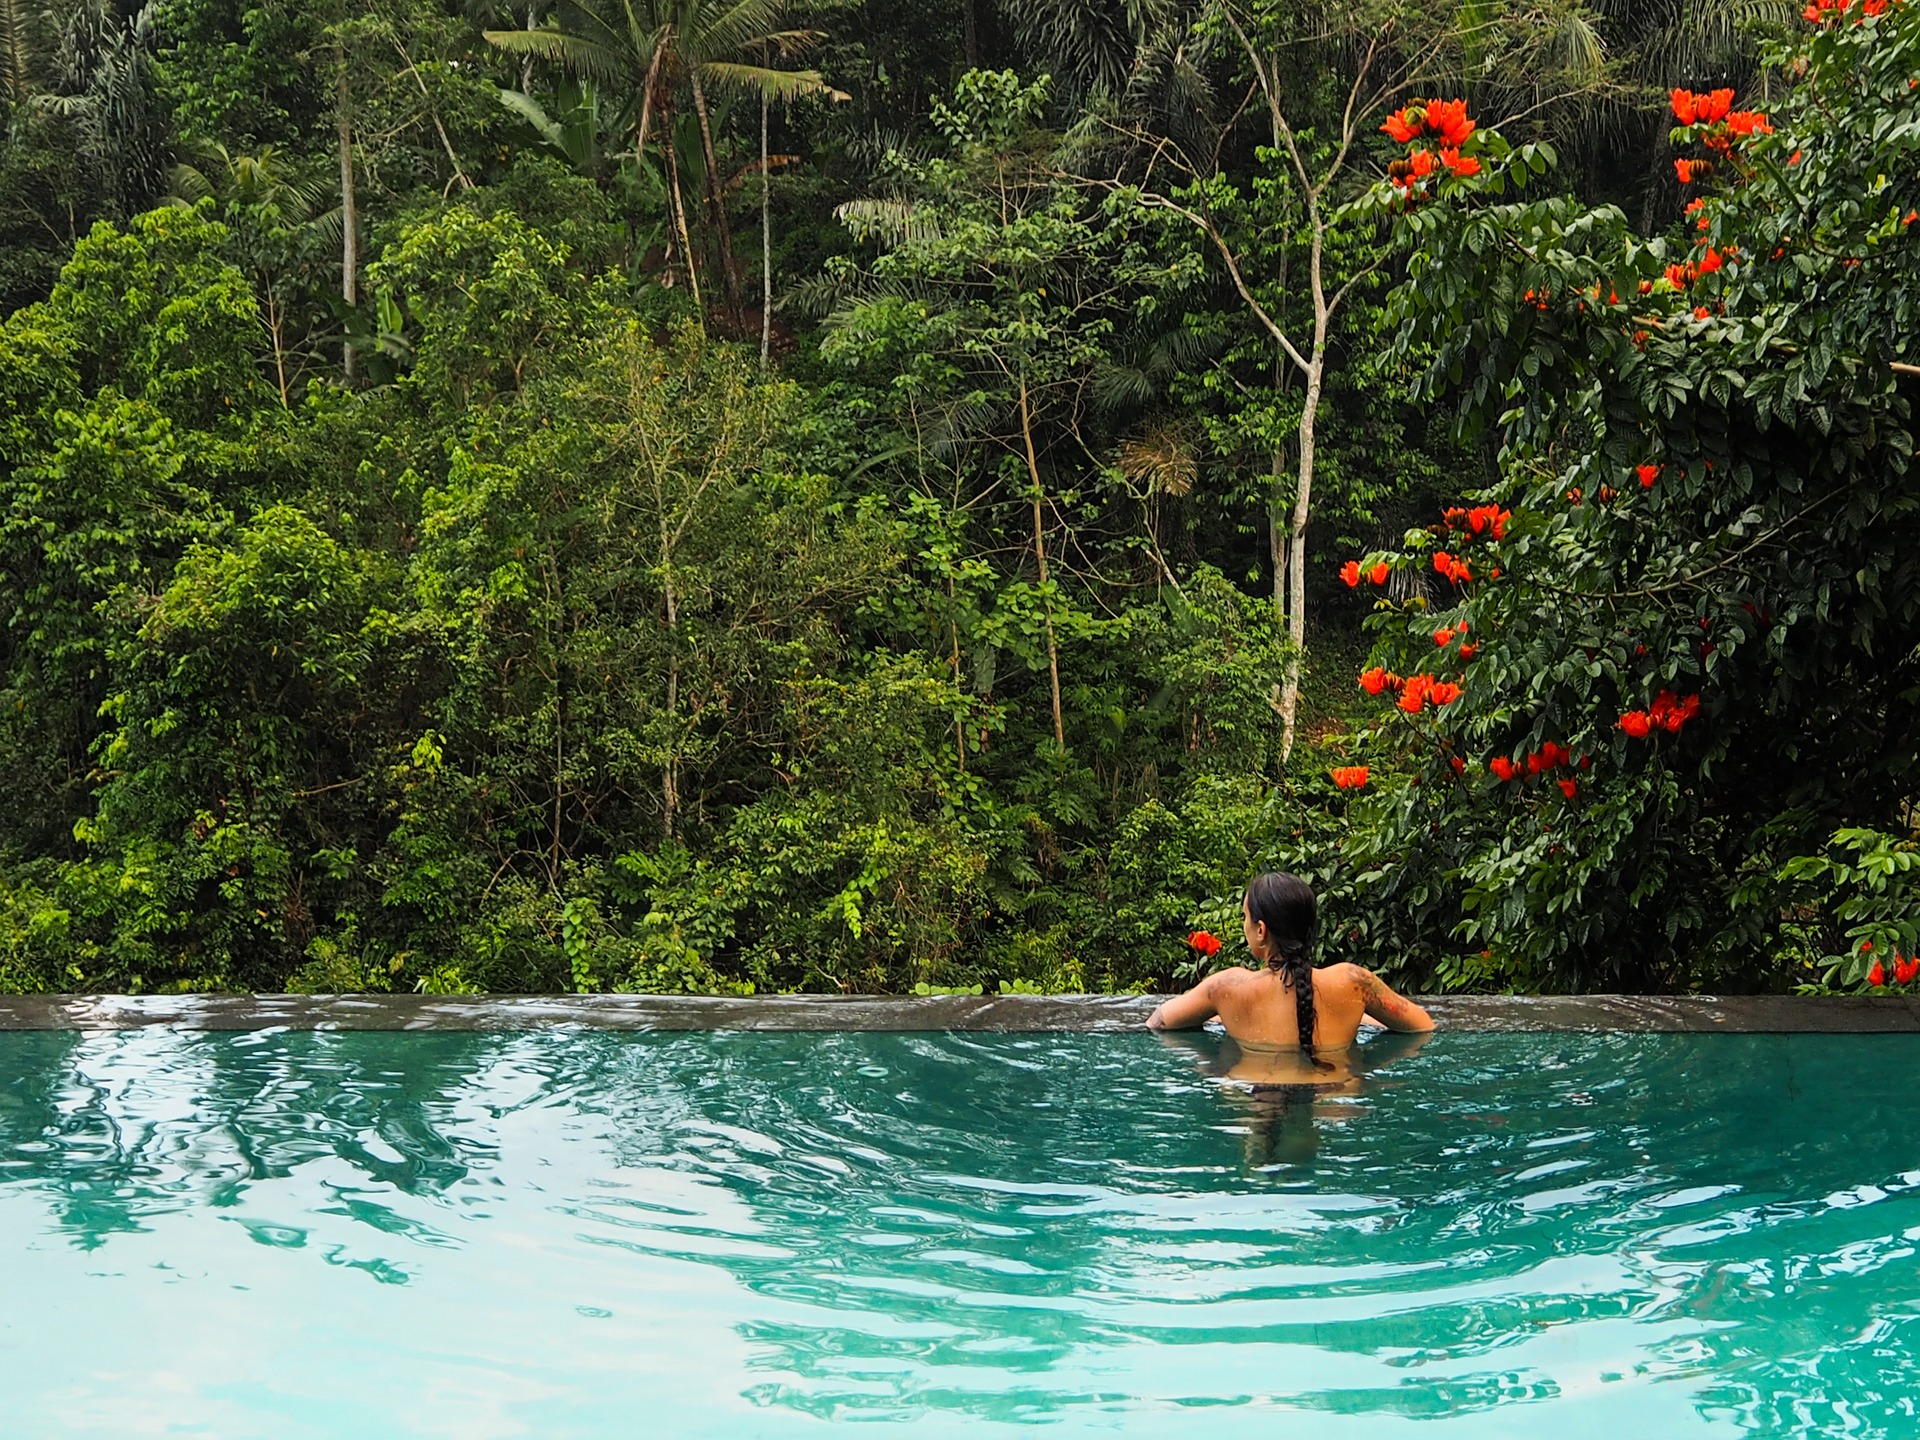 Where to Stay in Bali: The Best Hotels and Towns